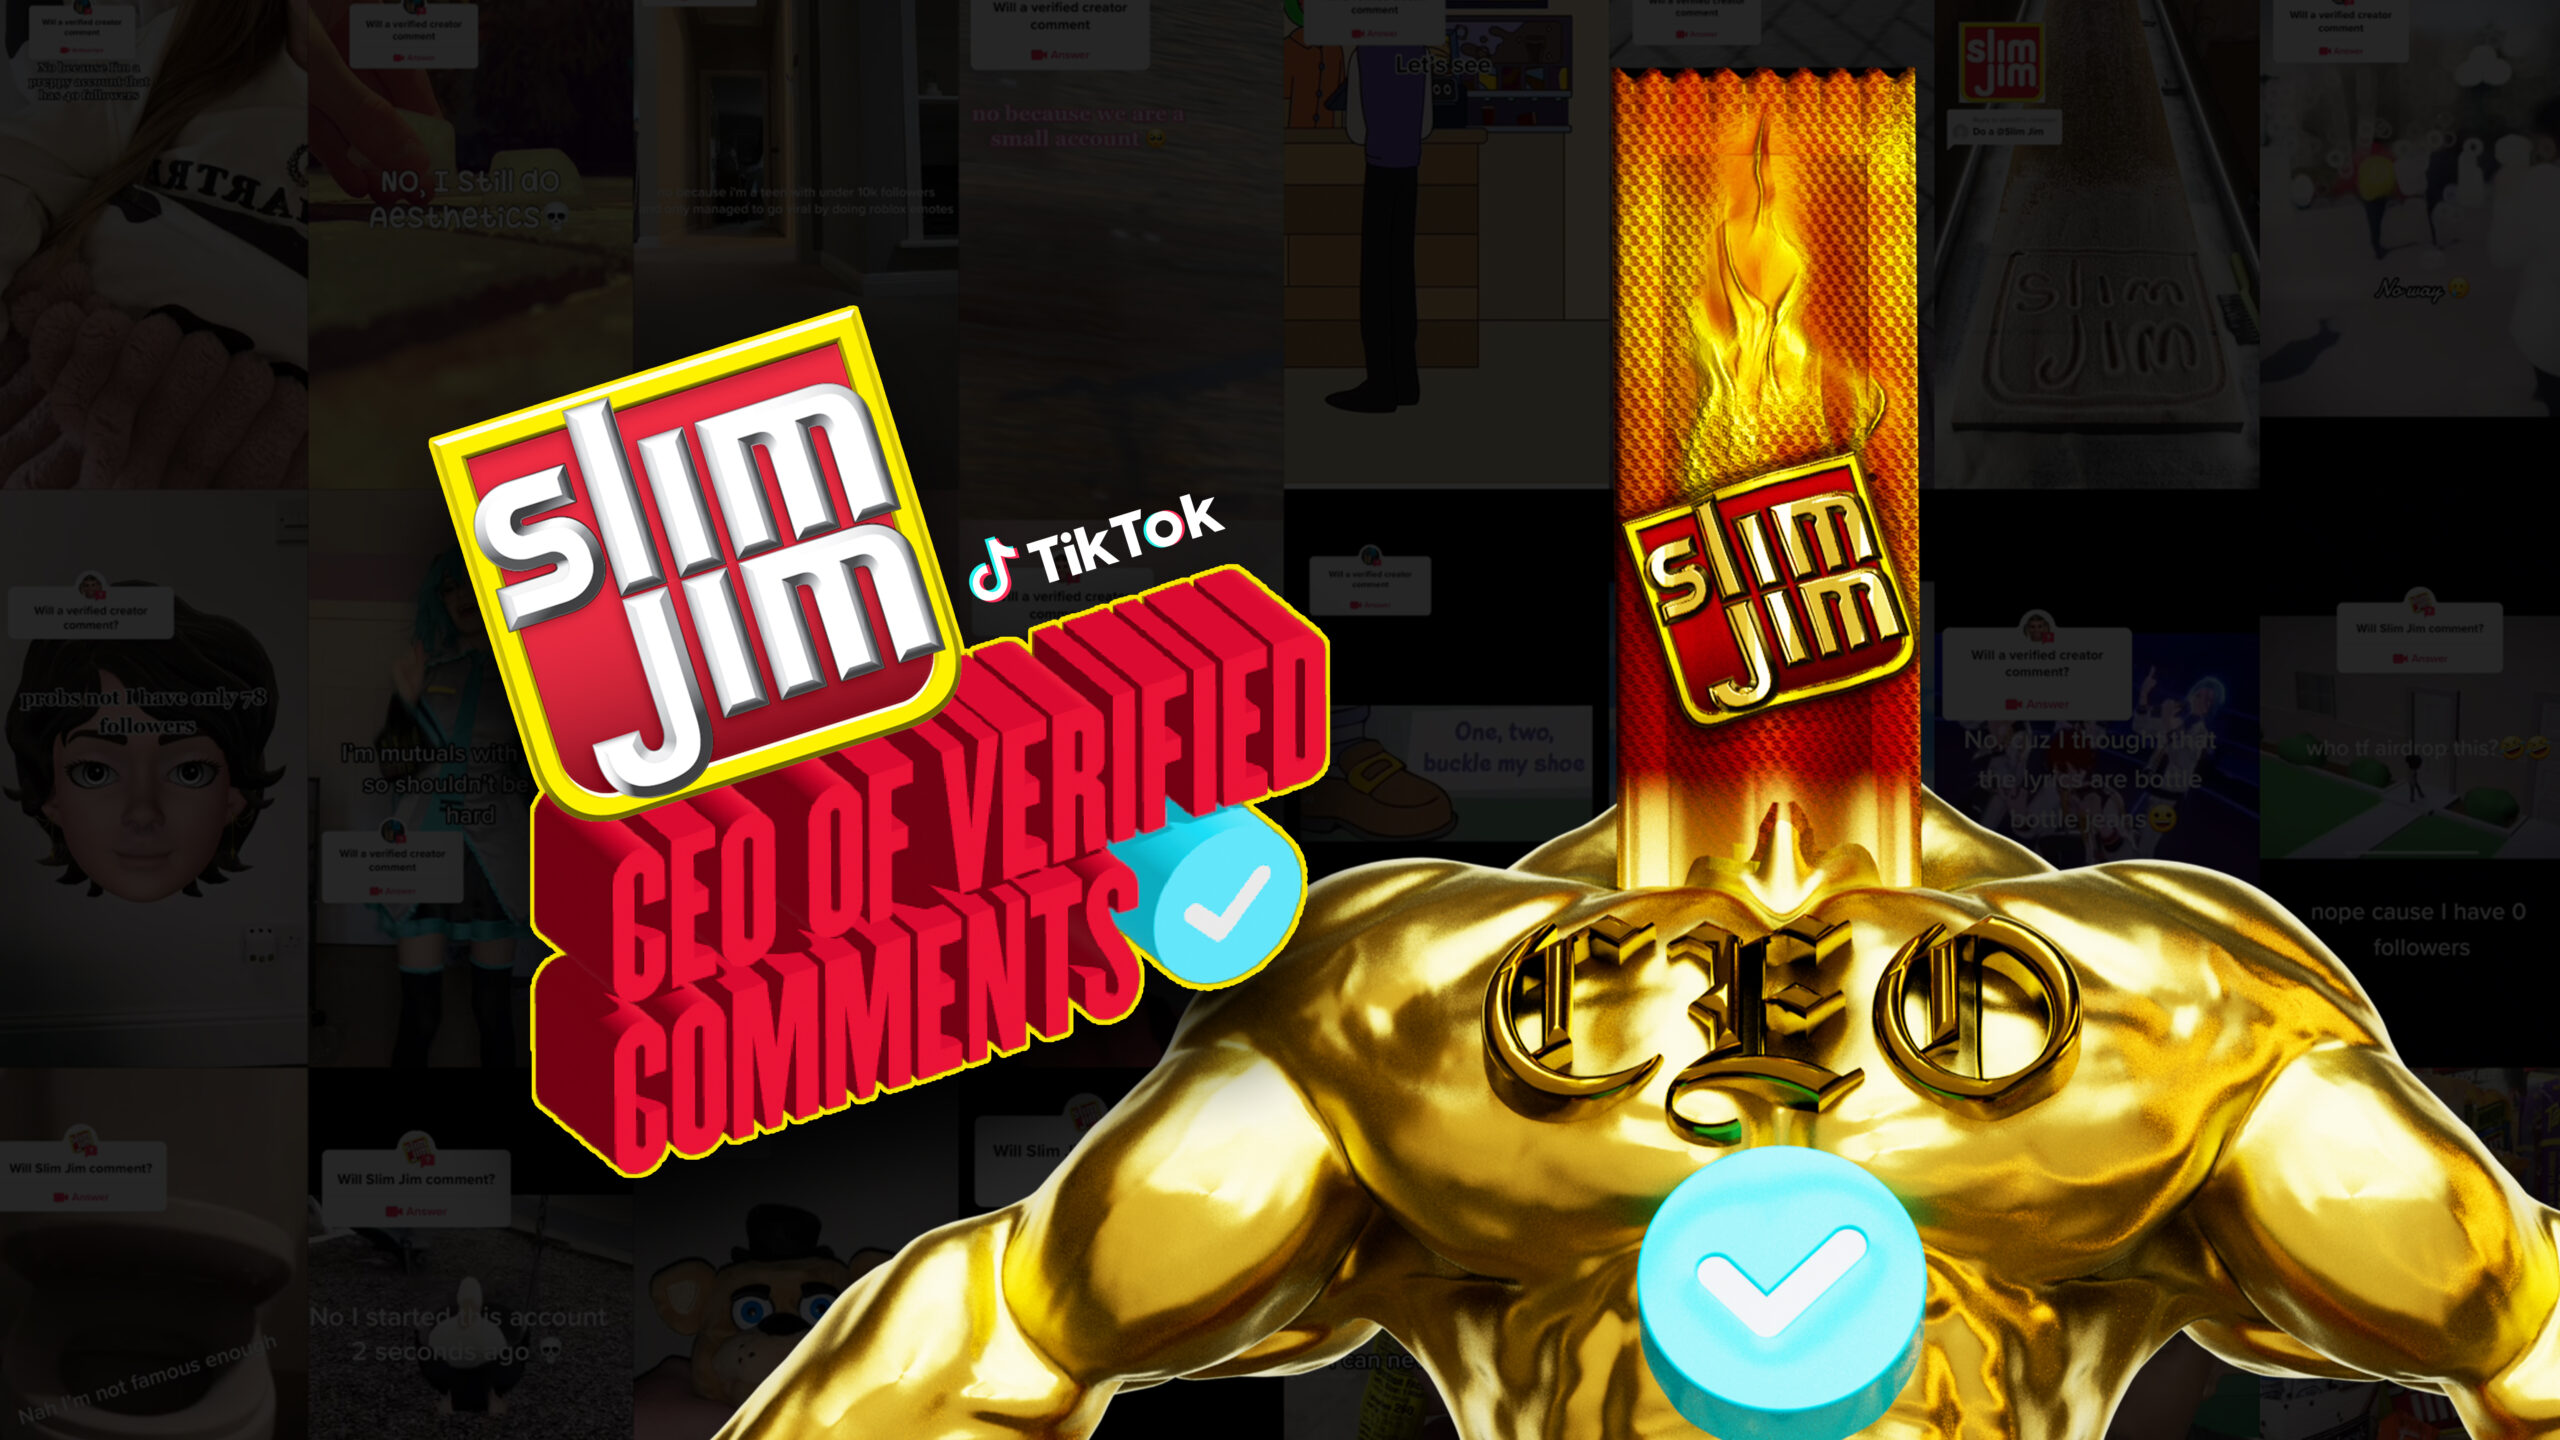 Golden Muscular Figure with Slim Jim Packaging as its head. Next to it reads "Slim Jim. CEO of Verified Comments" with the TikTok logo